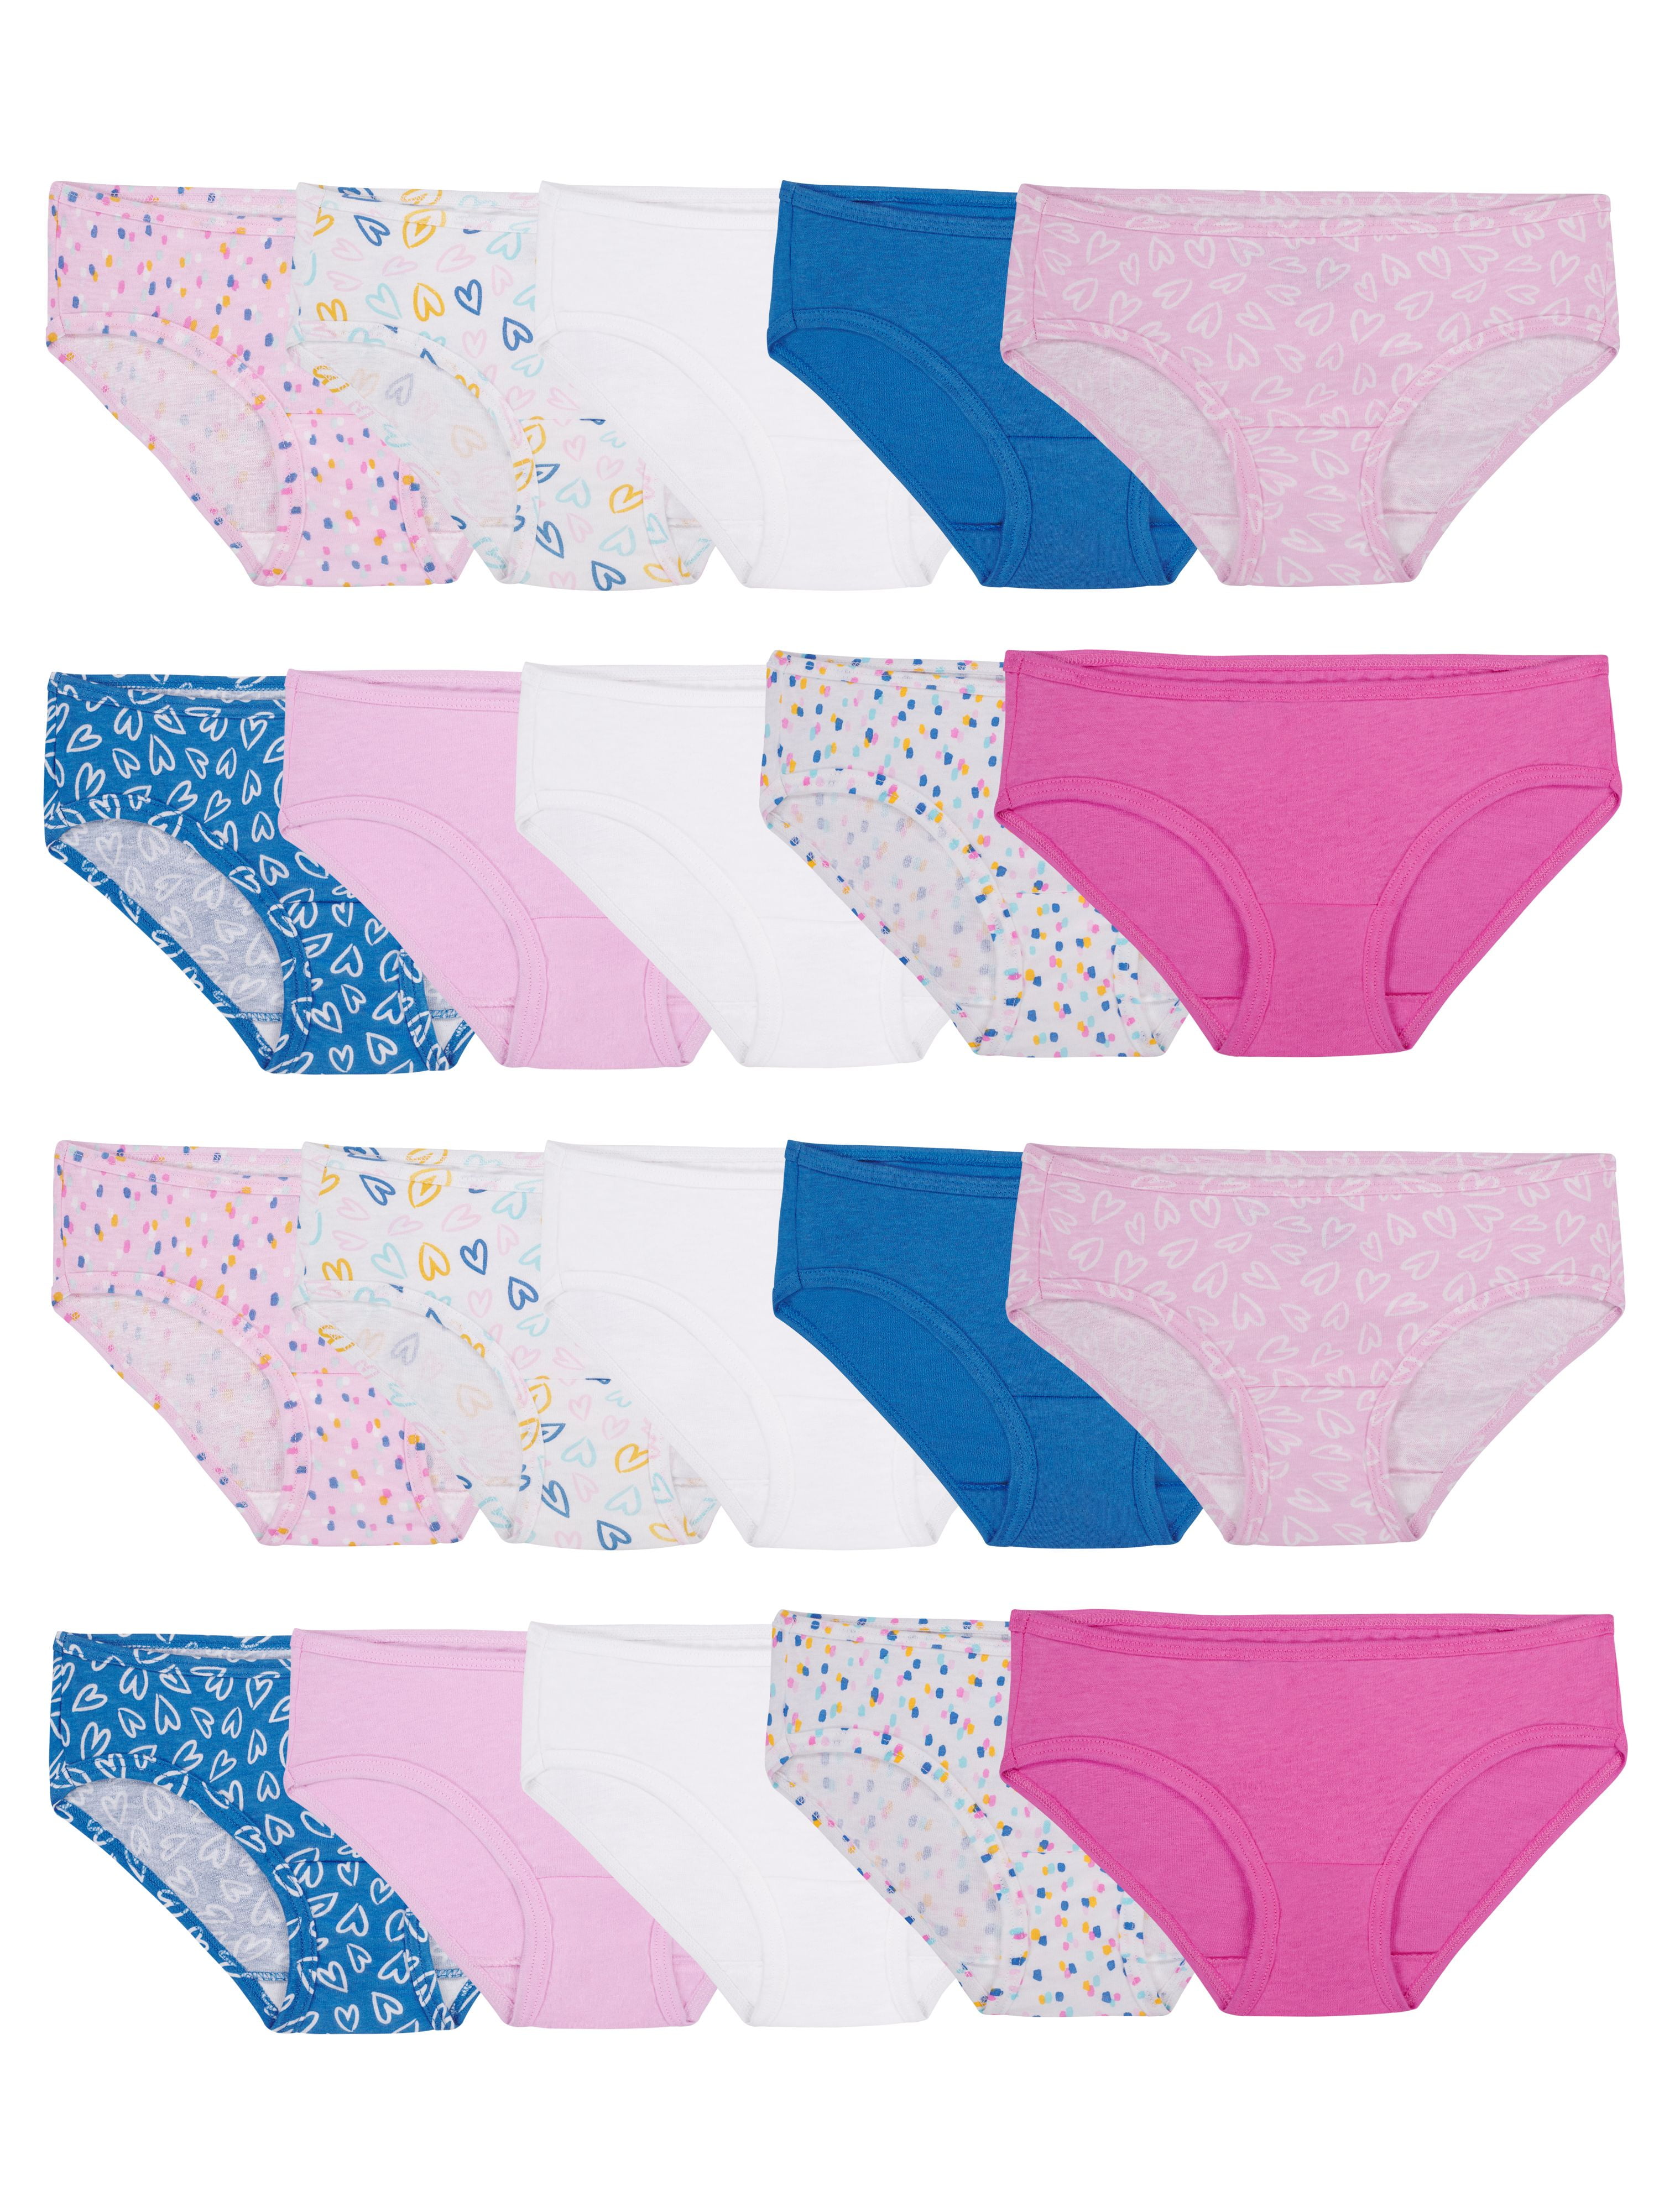 Fruit of the Loom Girls Cotton Hipster Underwear 